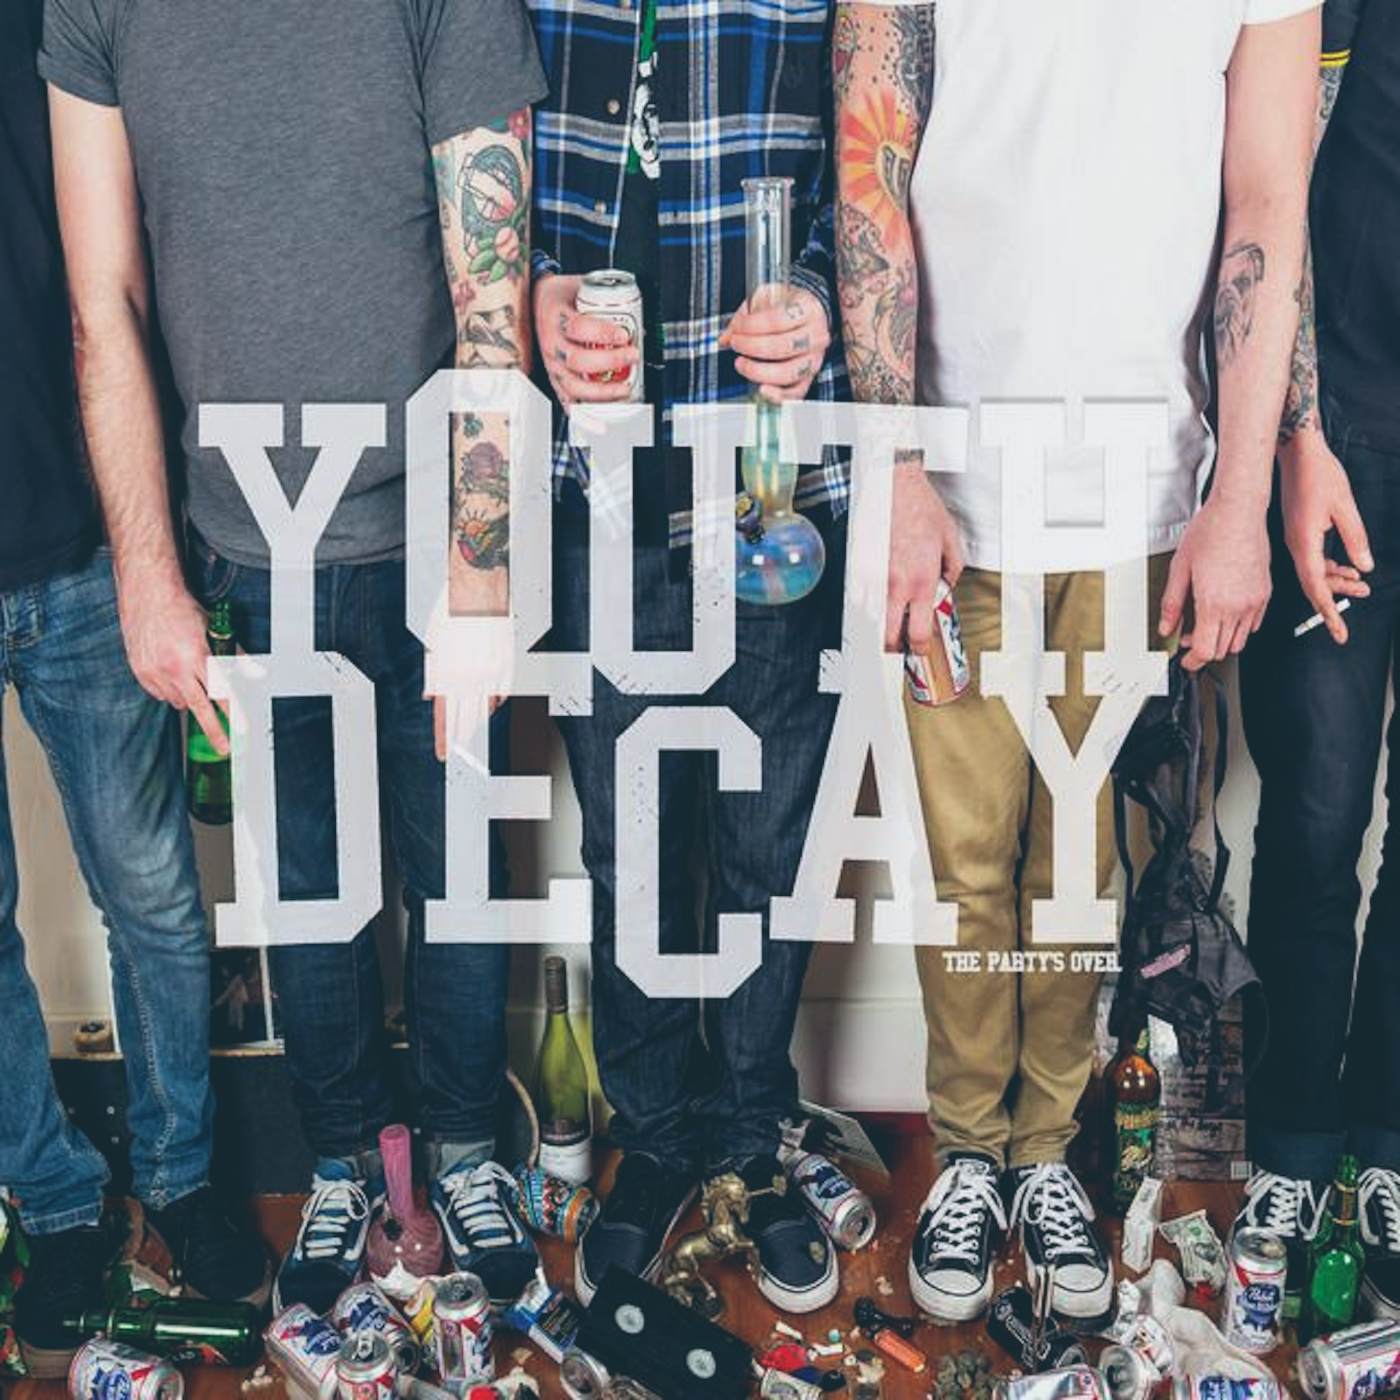 Youth Decay